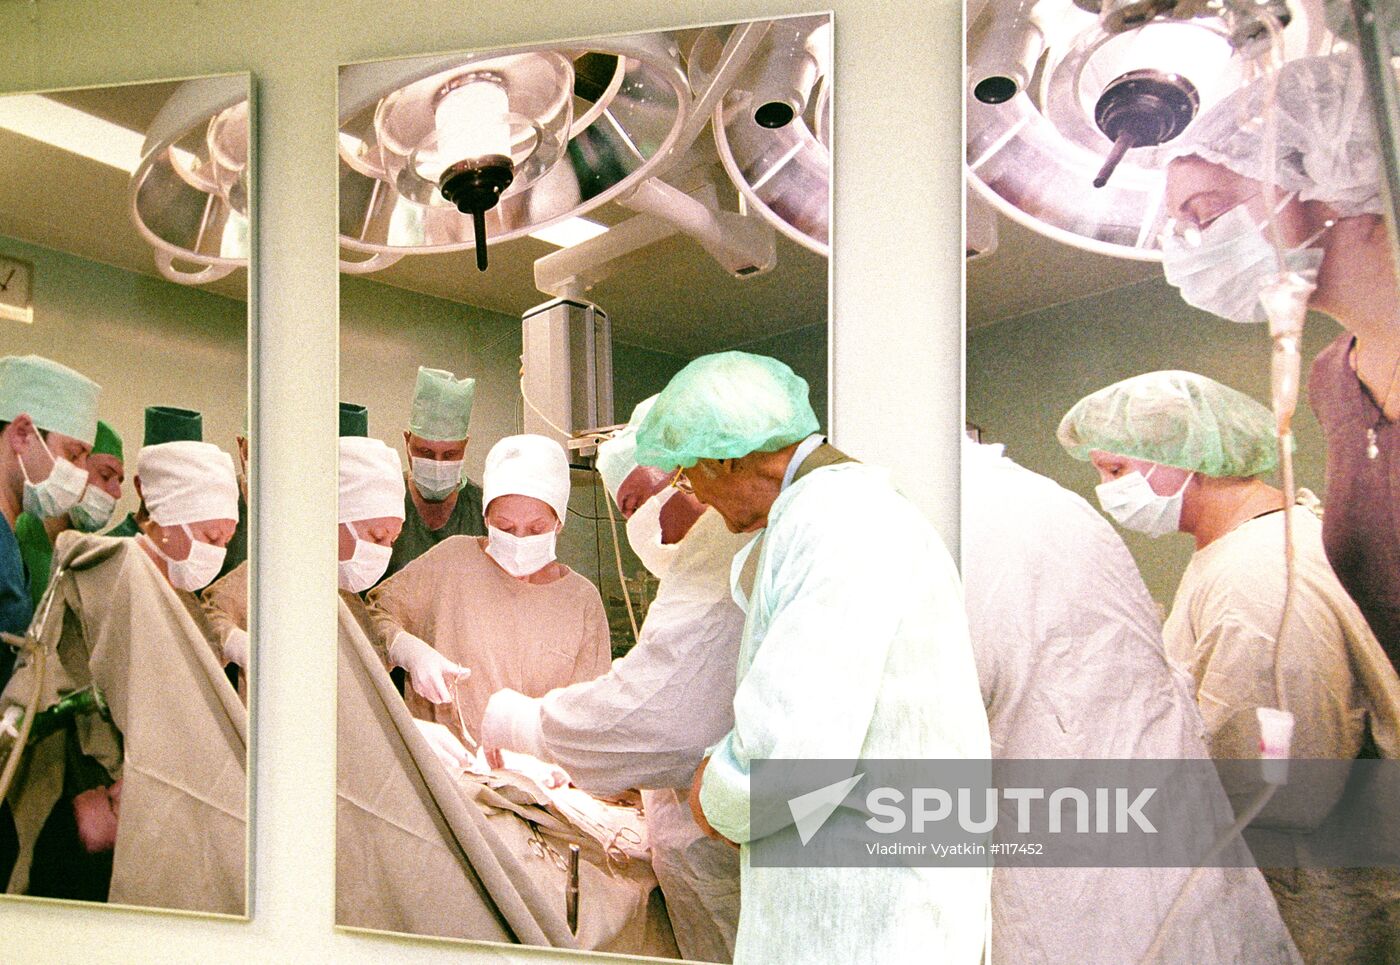 ONCOLOGICAL CENTER SURGERY OPERATION